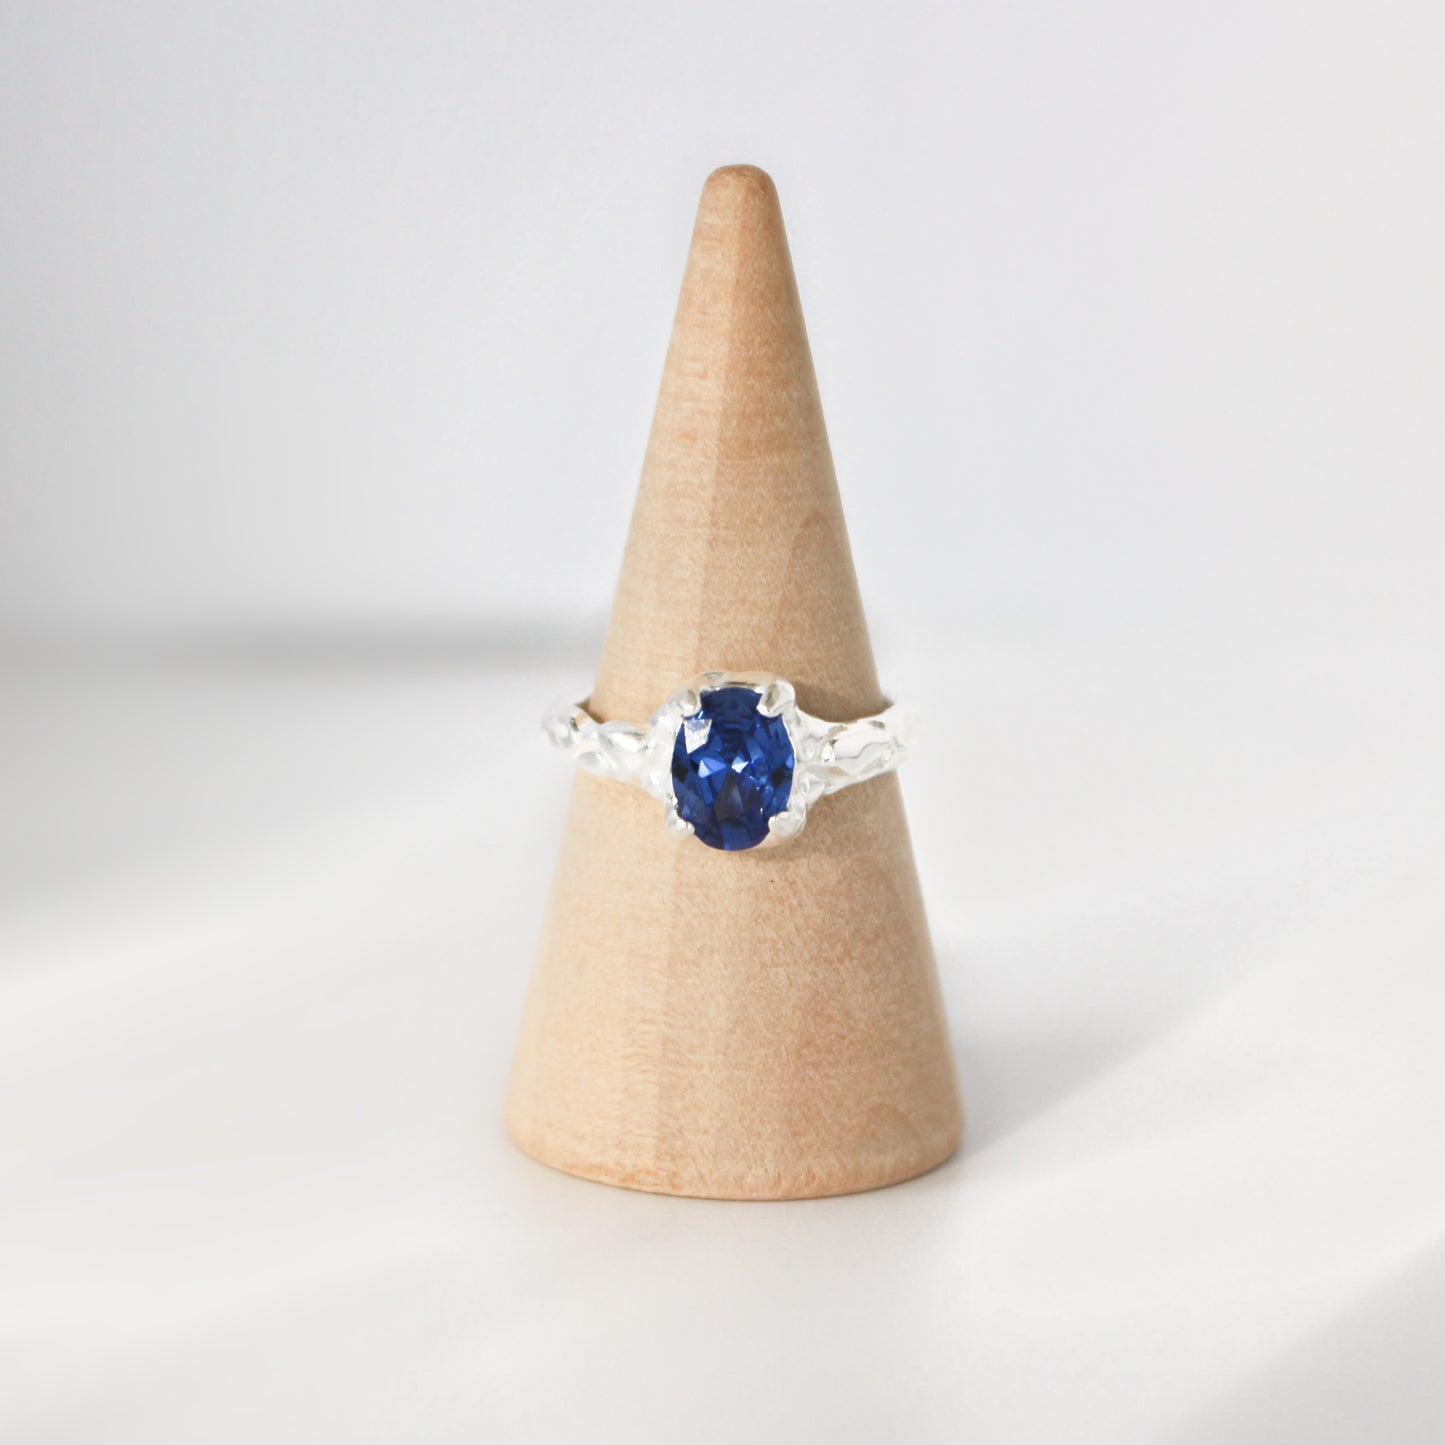 Waterproof ∙ Blue Sapphire Zirconia Ring in 925 sterling silver ∙ Oval cut ∙ Adjustable Ring ∙ Irregular shape ∙ Gift for her